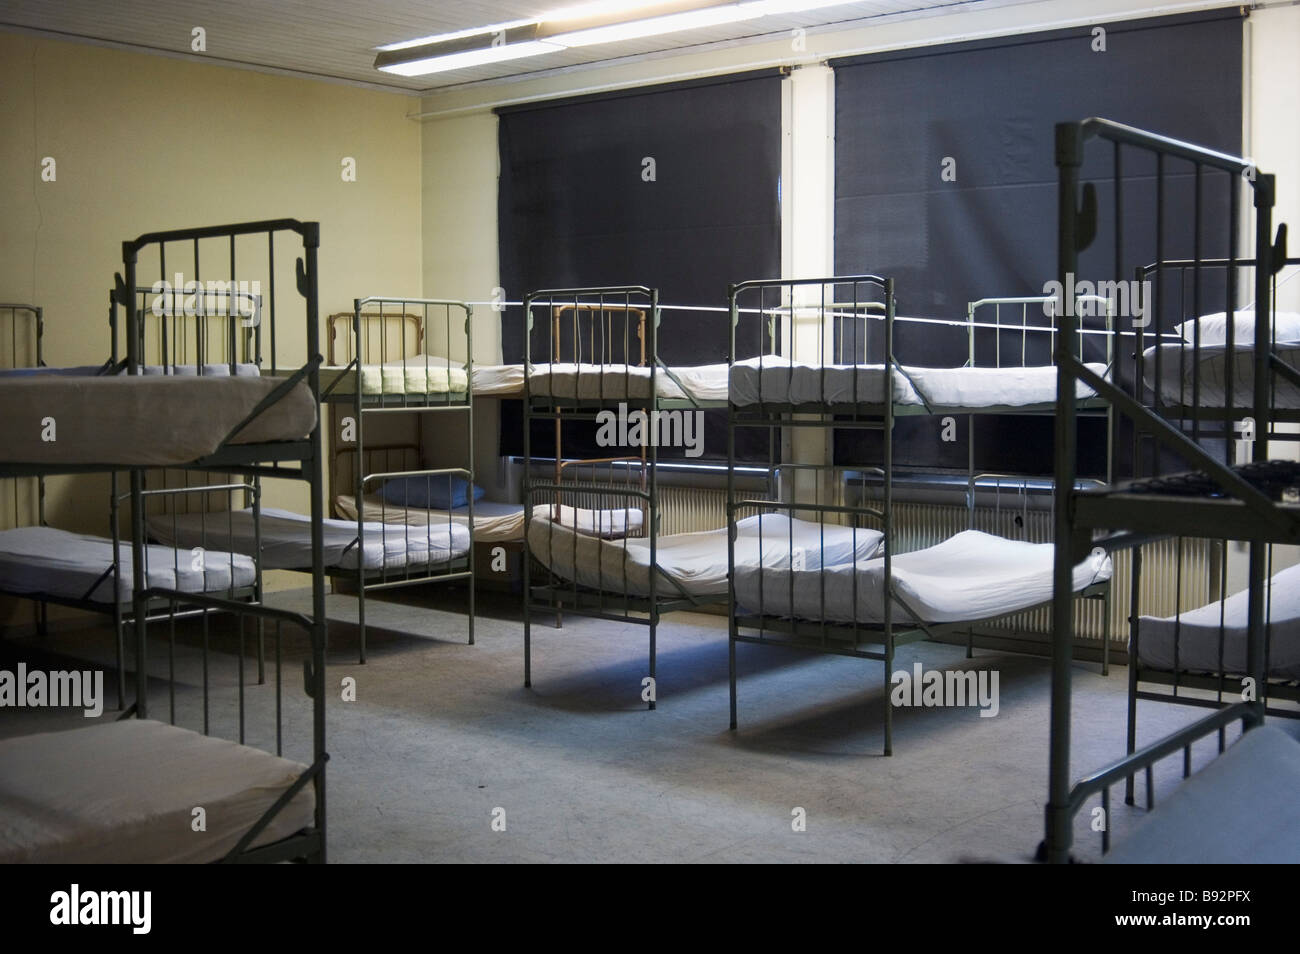 bunkbeds in an old school Stock Photo